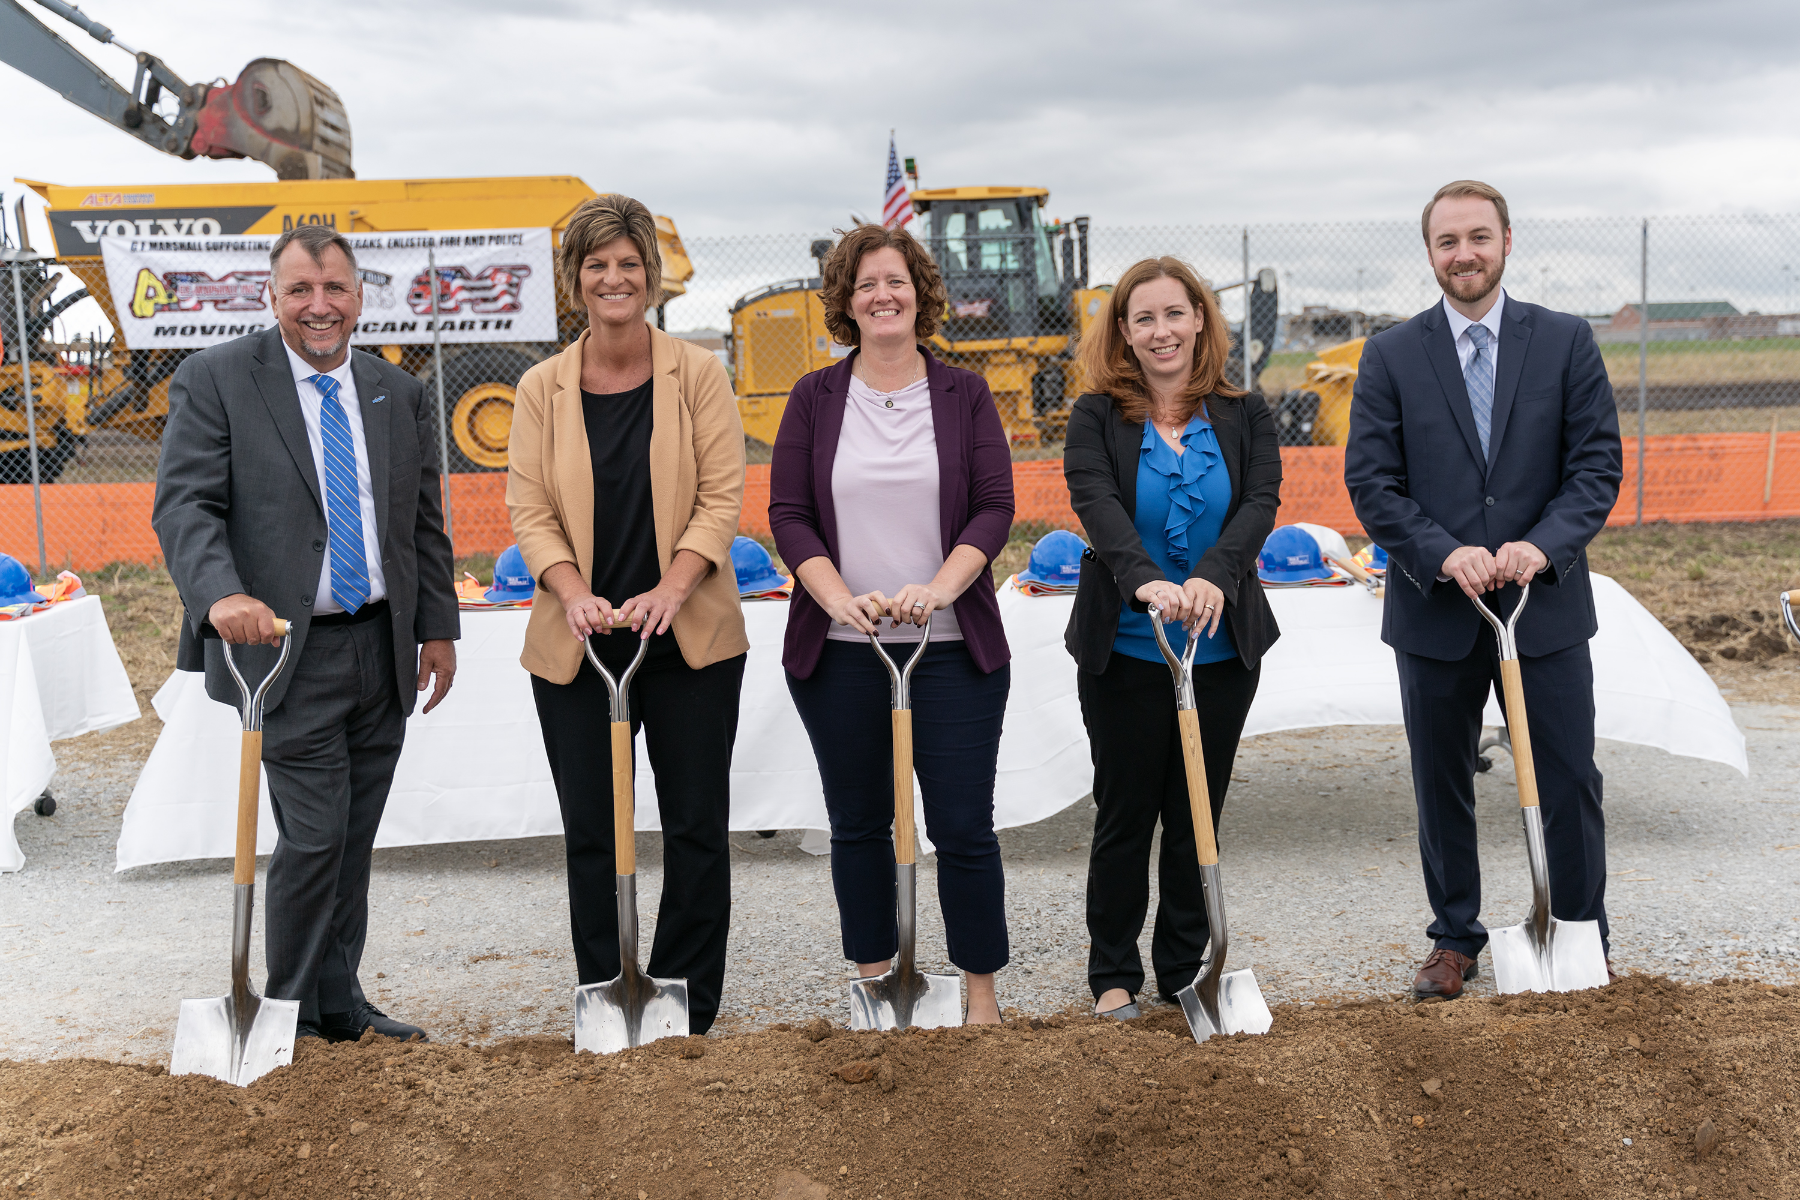 A groundbreaking was held on Thursday, Sep. 28, 2023 for the new $1.4 Billion correctional facility under construction in Westville, Indiana. SCOTT ROBERSON | Indiana Department of Correction